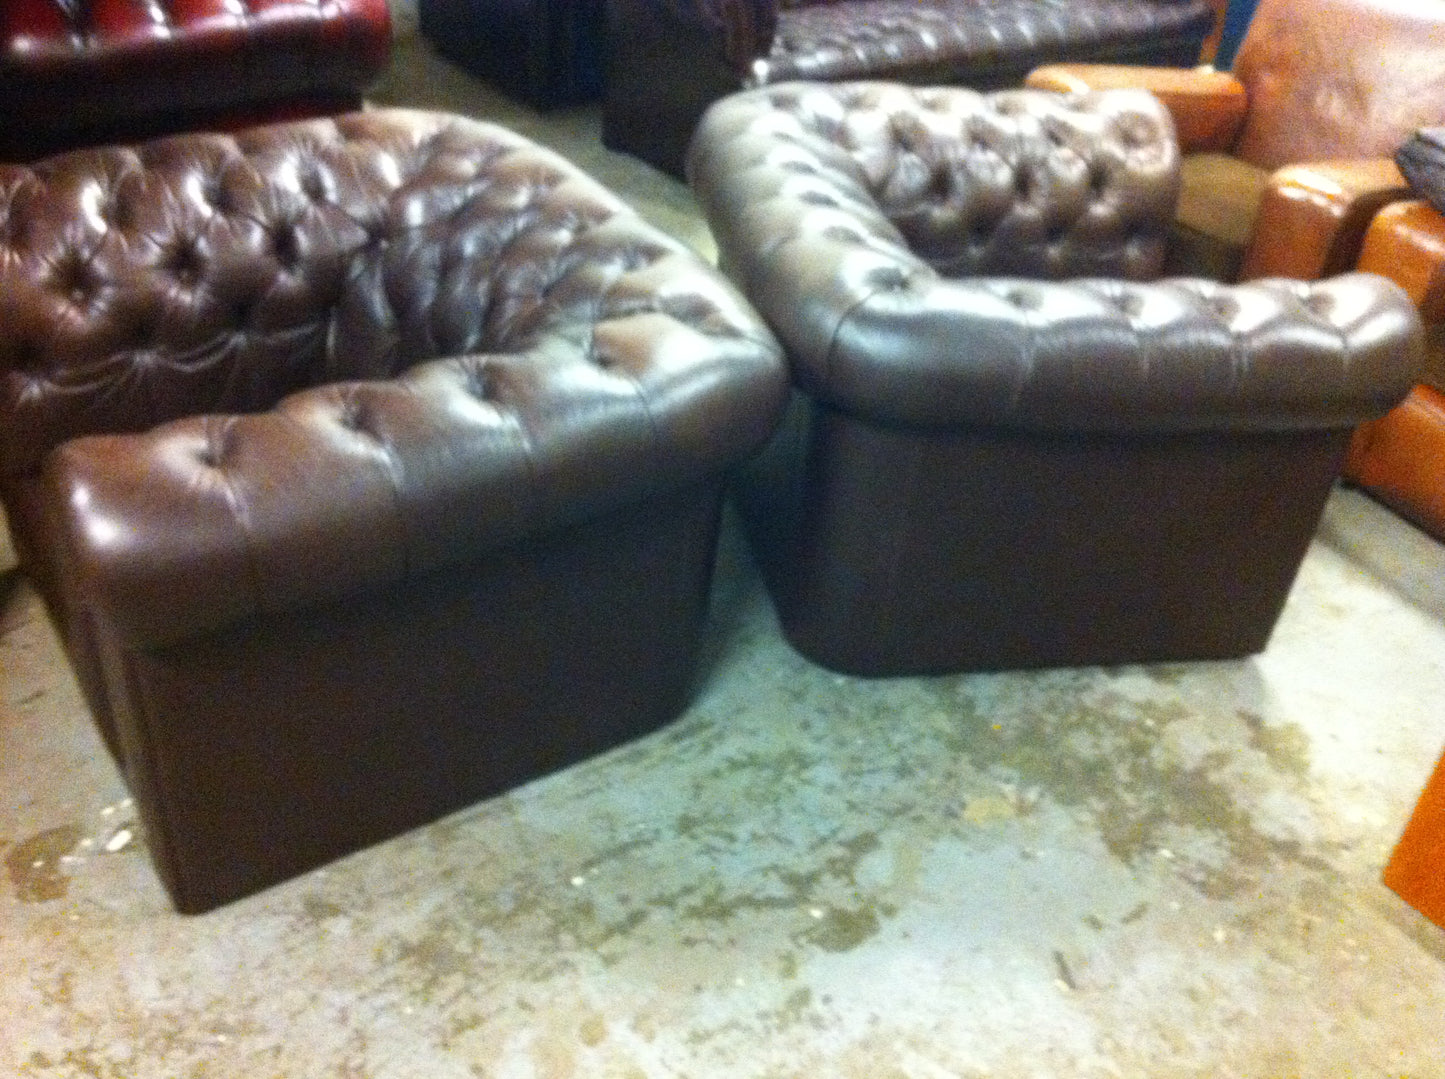 Lovely Pair 20th.C Vintage Brown Leather Deep Buttoned Chesterfield Club Chairs